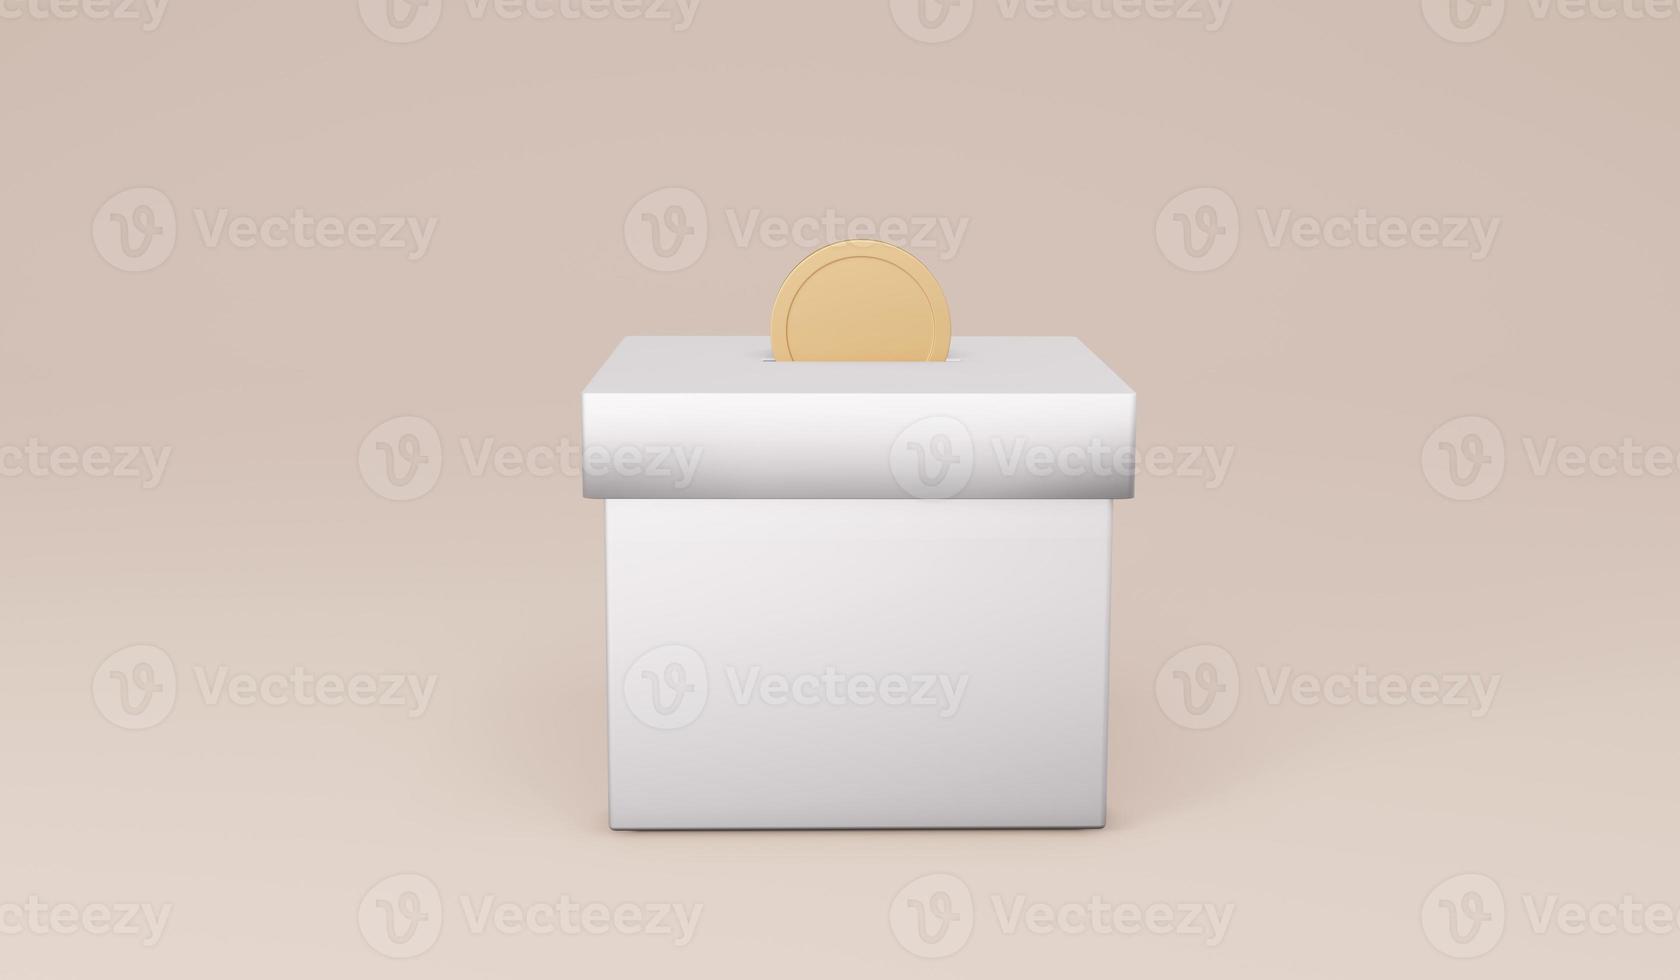 3D Rendering of a money coin in a box on background concept of donation, money jar, savings. 3D Render illustration. photo